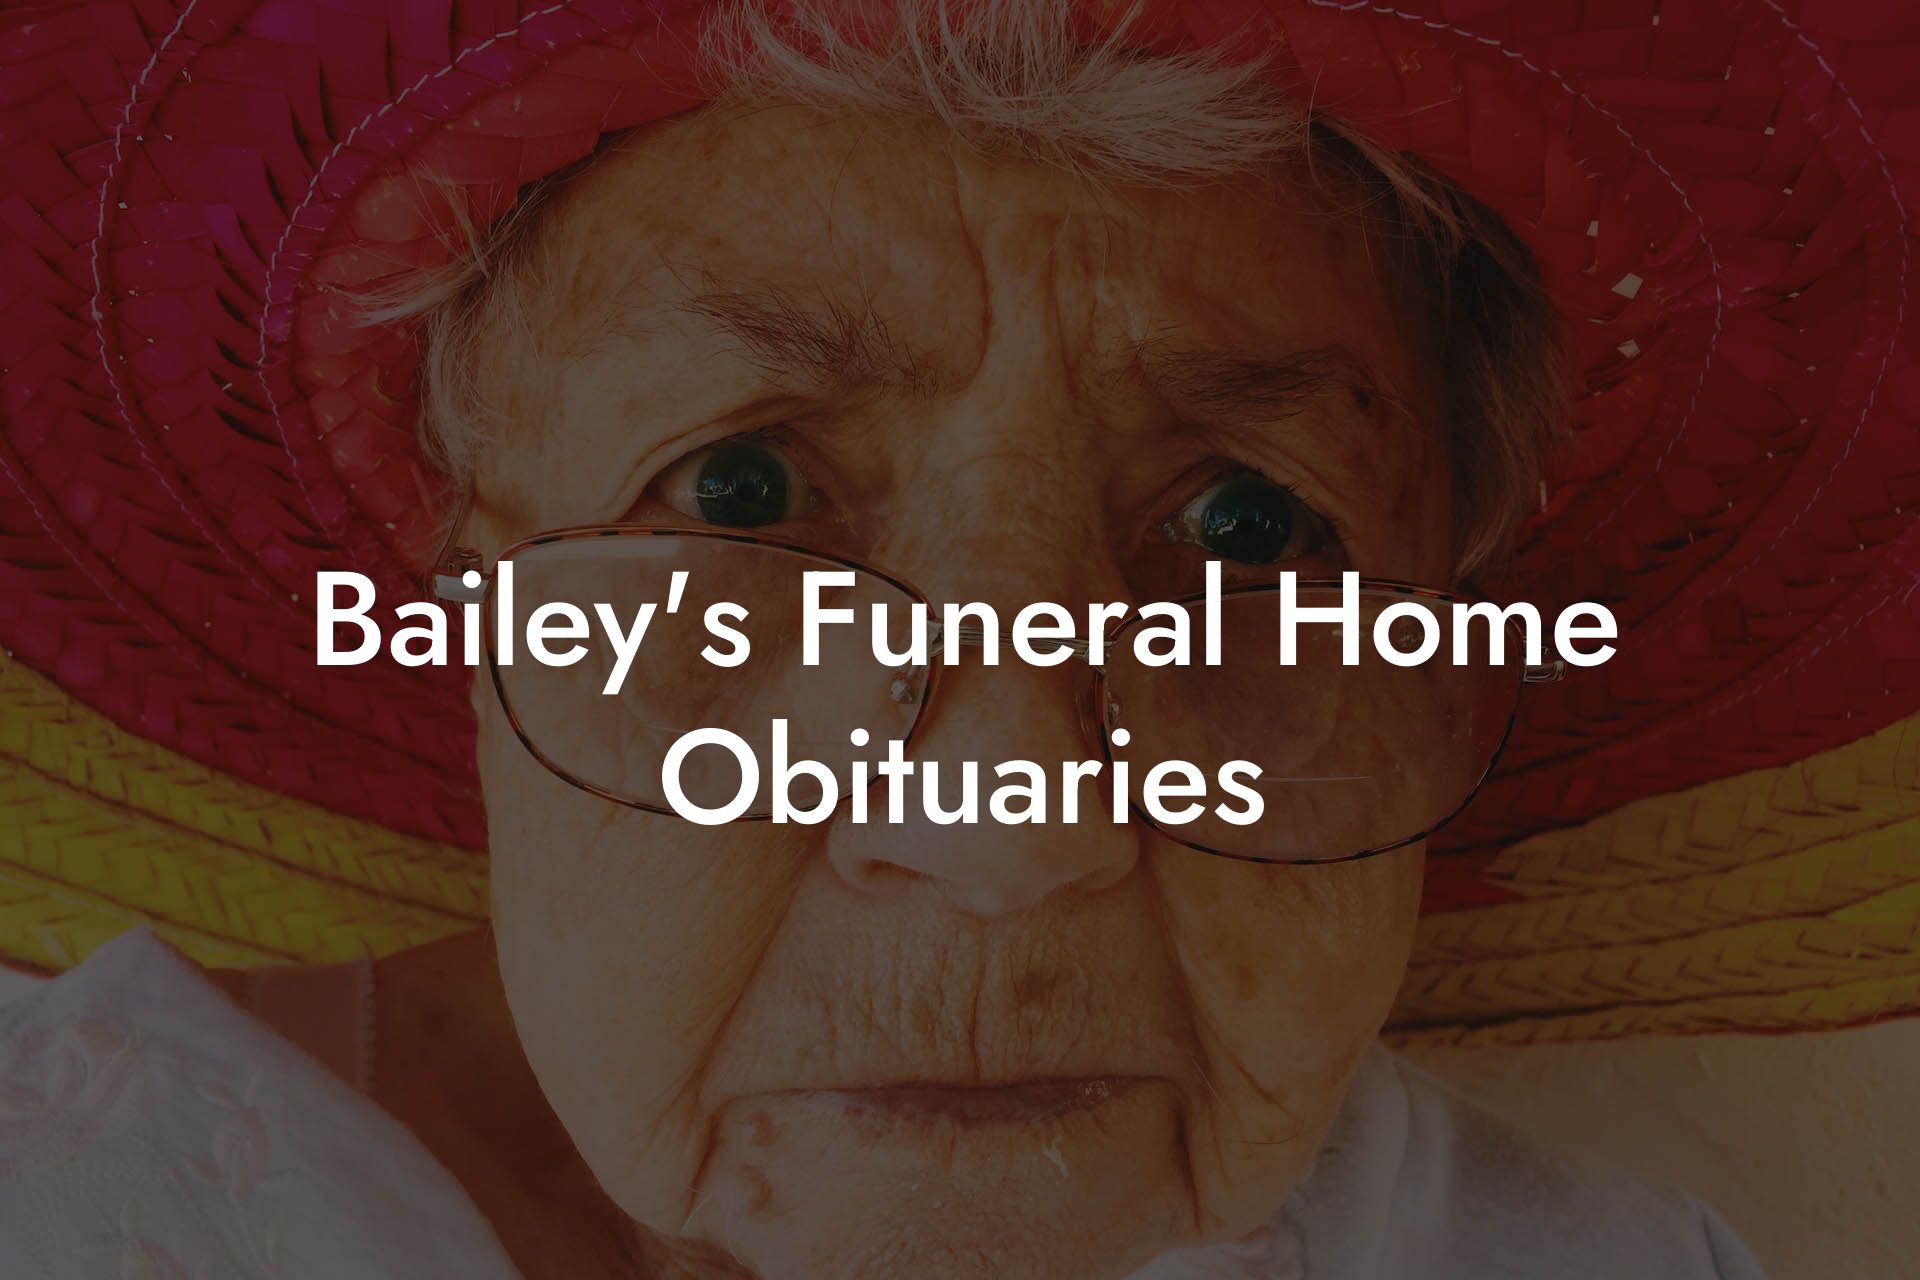 Bailey's Funeral Home Obituaries